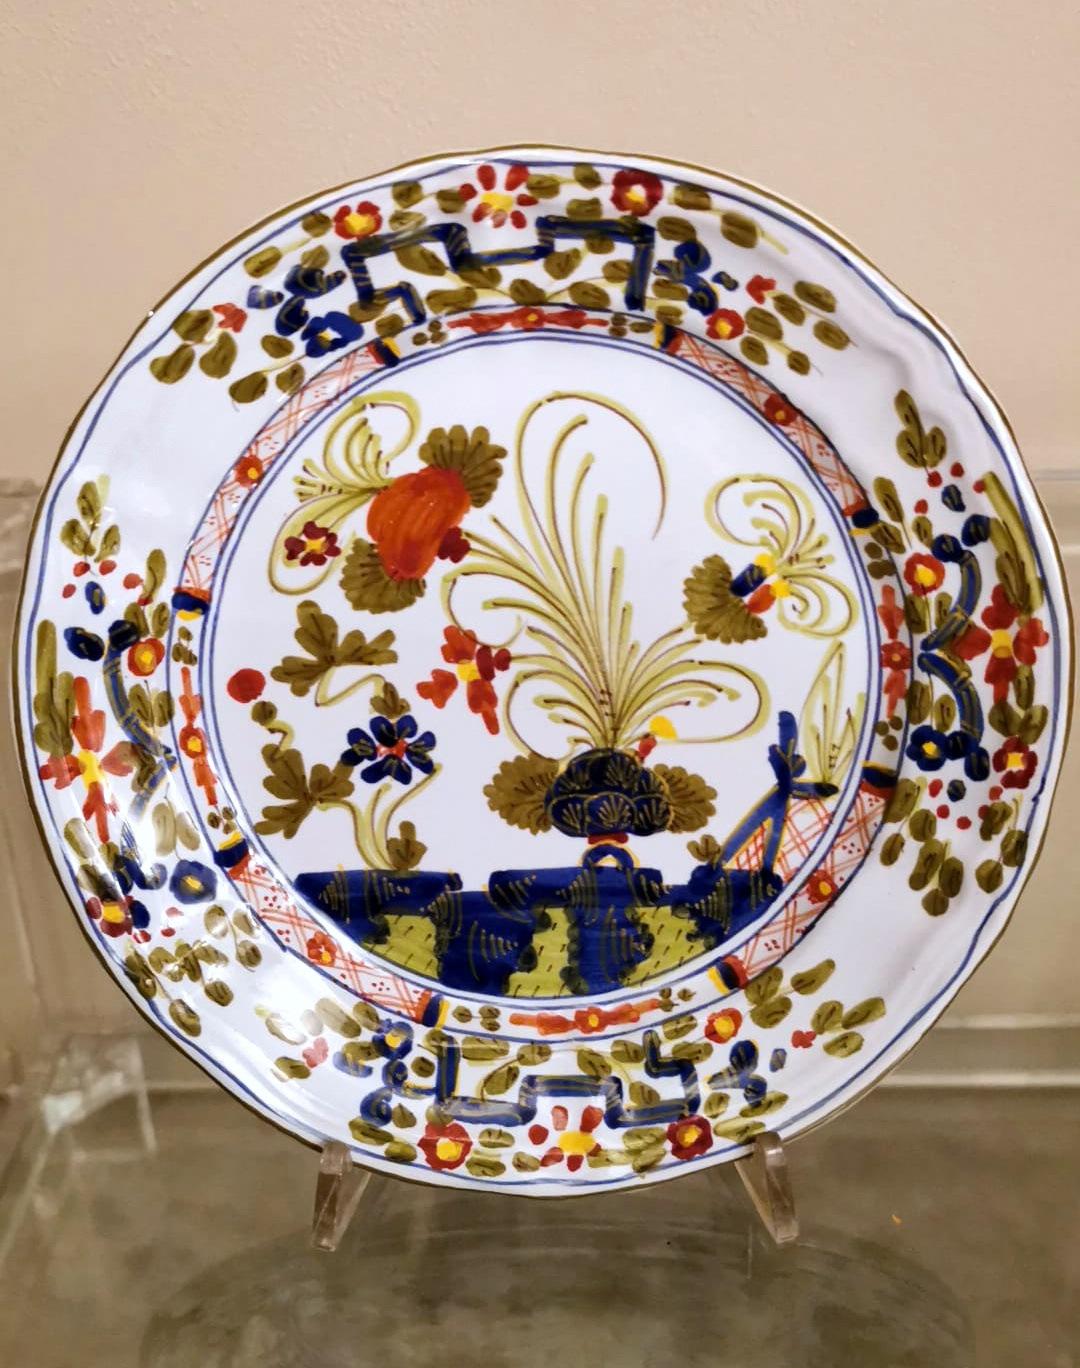 Hand-Painted Faenza Italian Ceramic 11 Hand Painted Dessert Plates With 